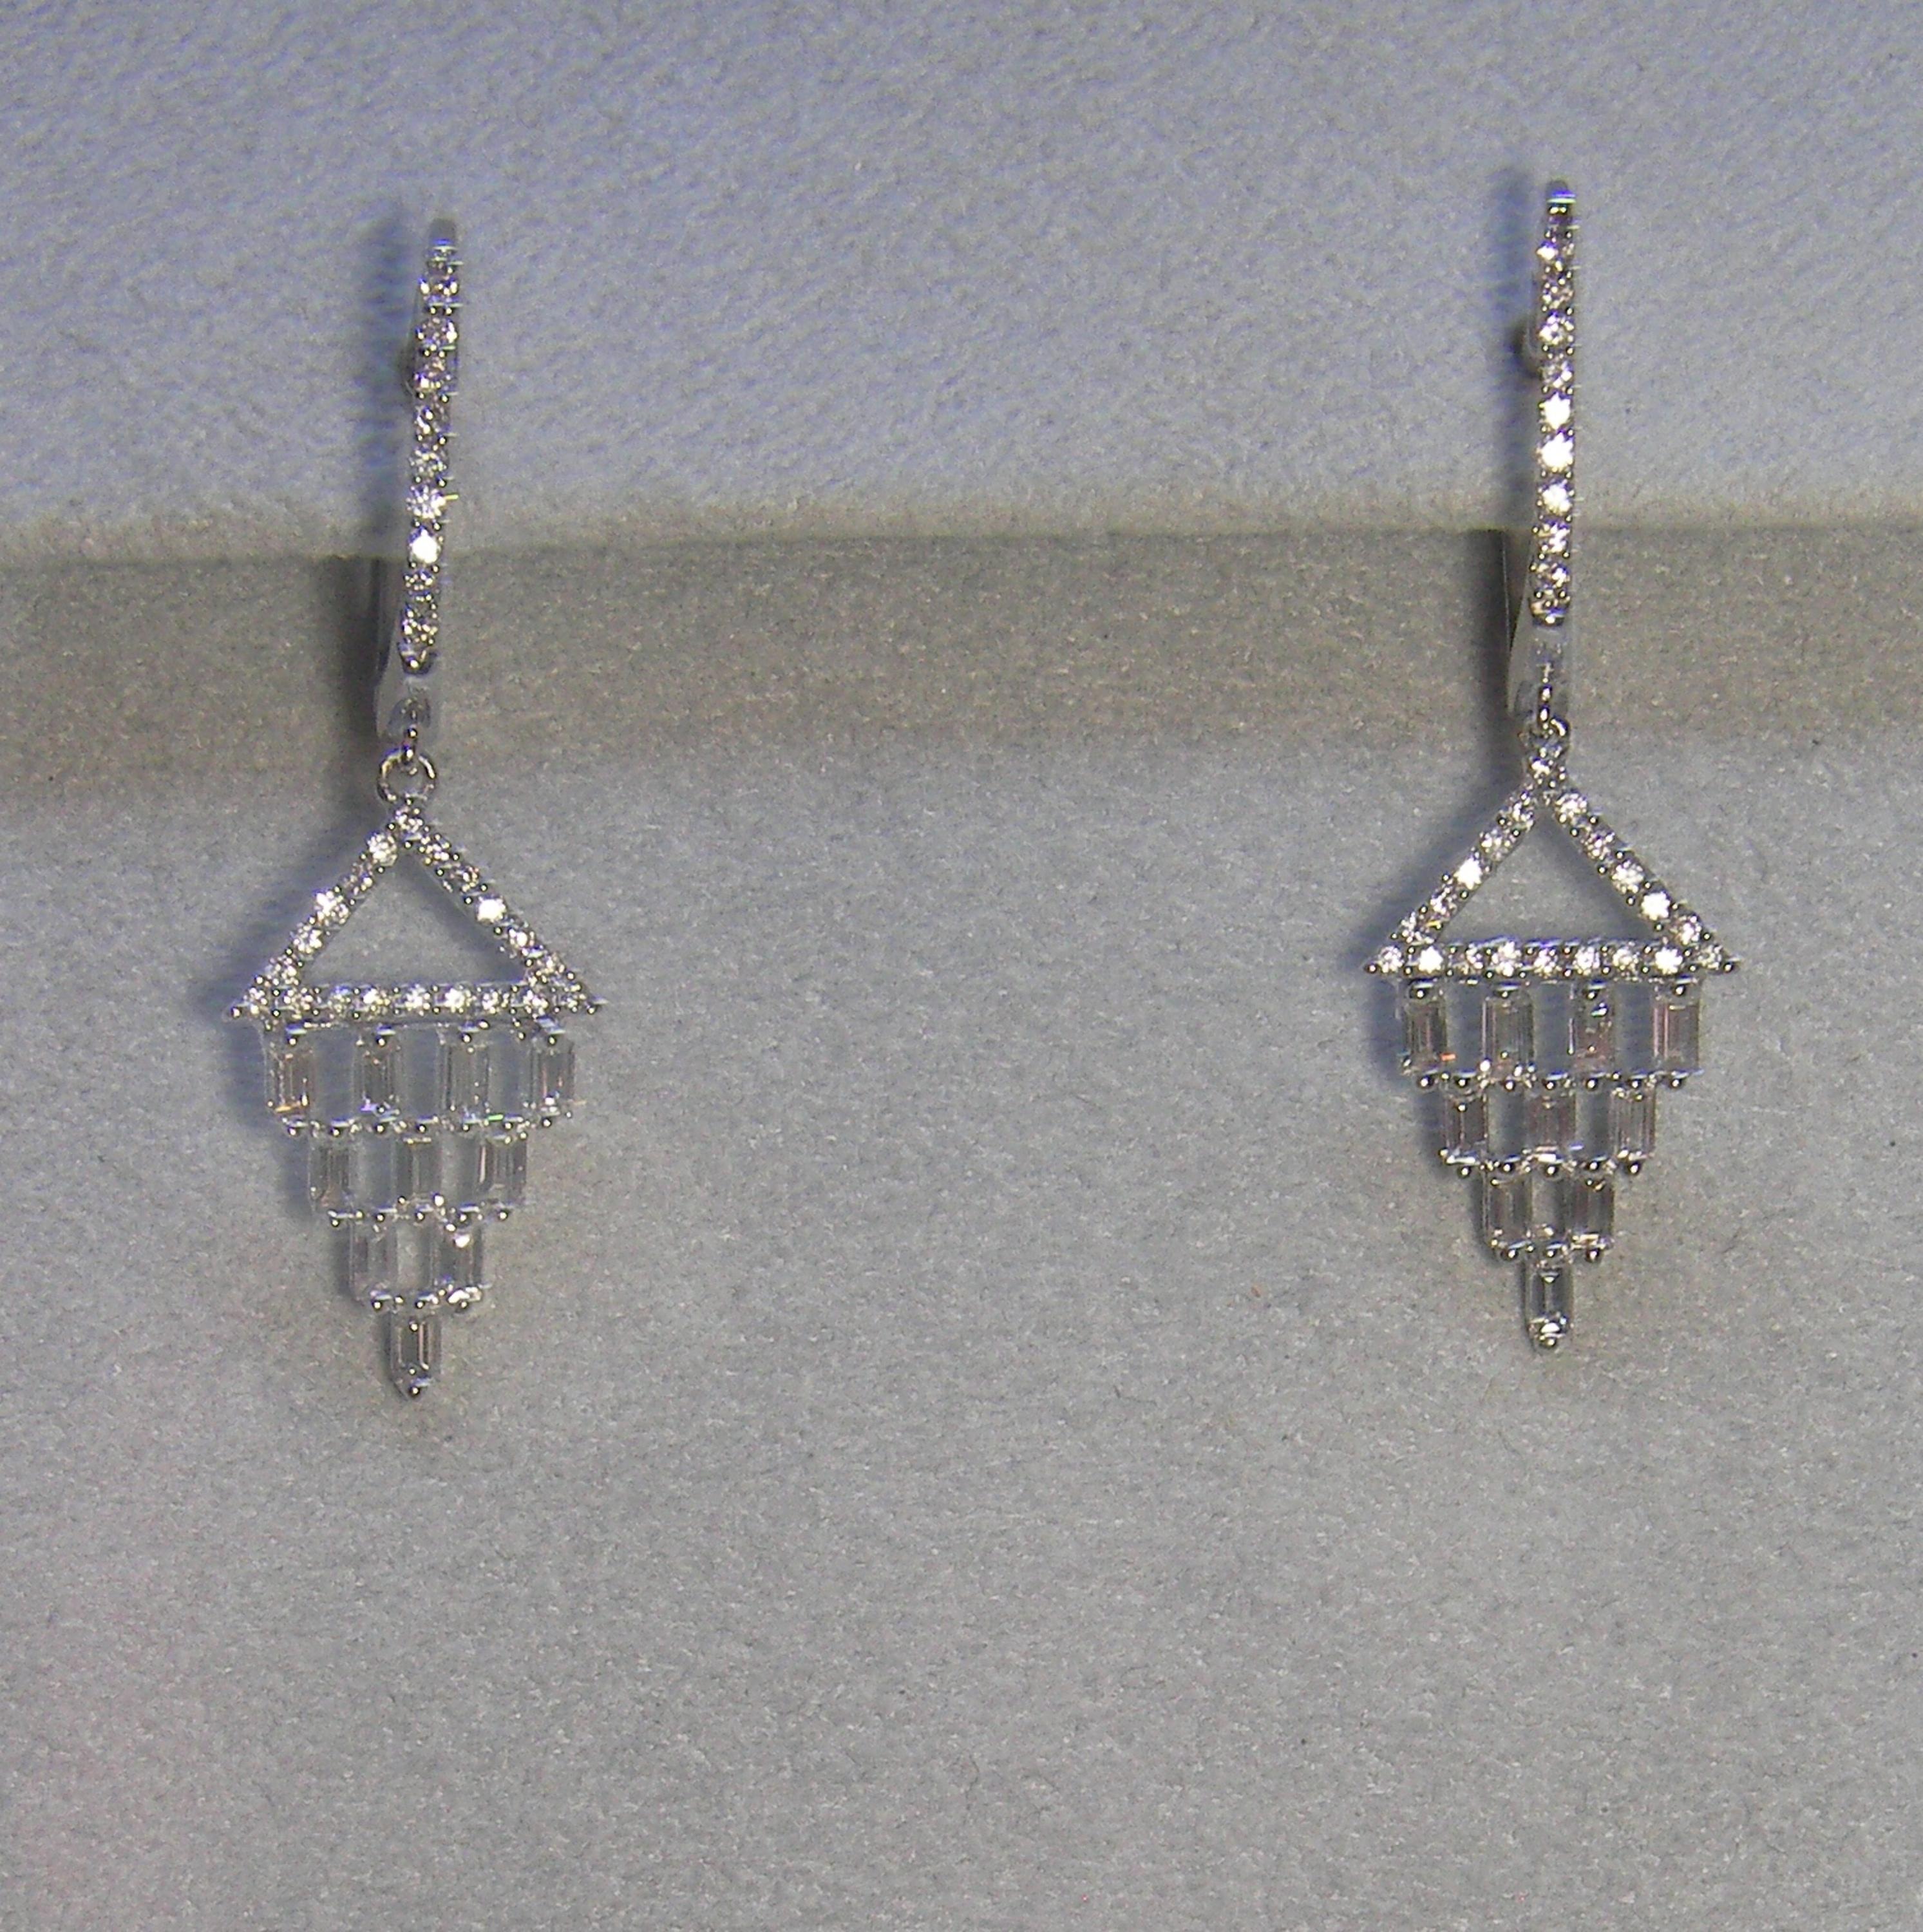 18 Karat White Gold Diamond Dangle Earrings


76 Diamonds 0,50 Carat

Founded in 1974, Gianni Lazzaro is a family-owned jewelery company based out of Düsseldorf, Germany.
Although rooted in Germany, Gianni Lazzaro's style and design is more